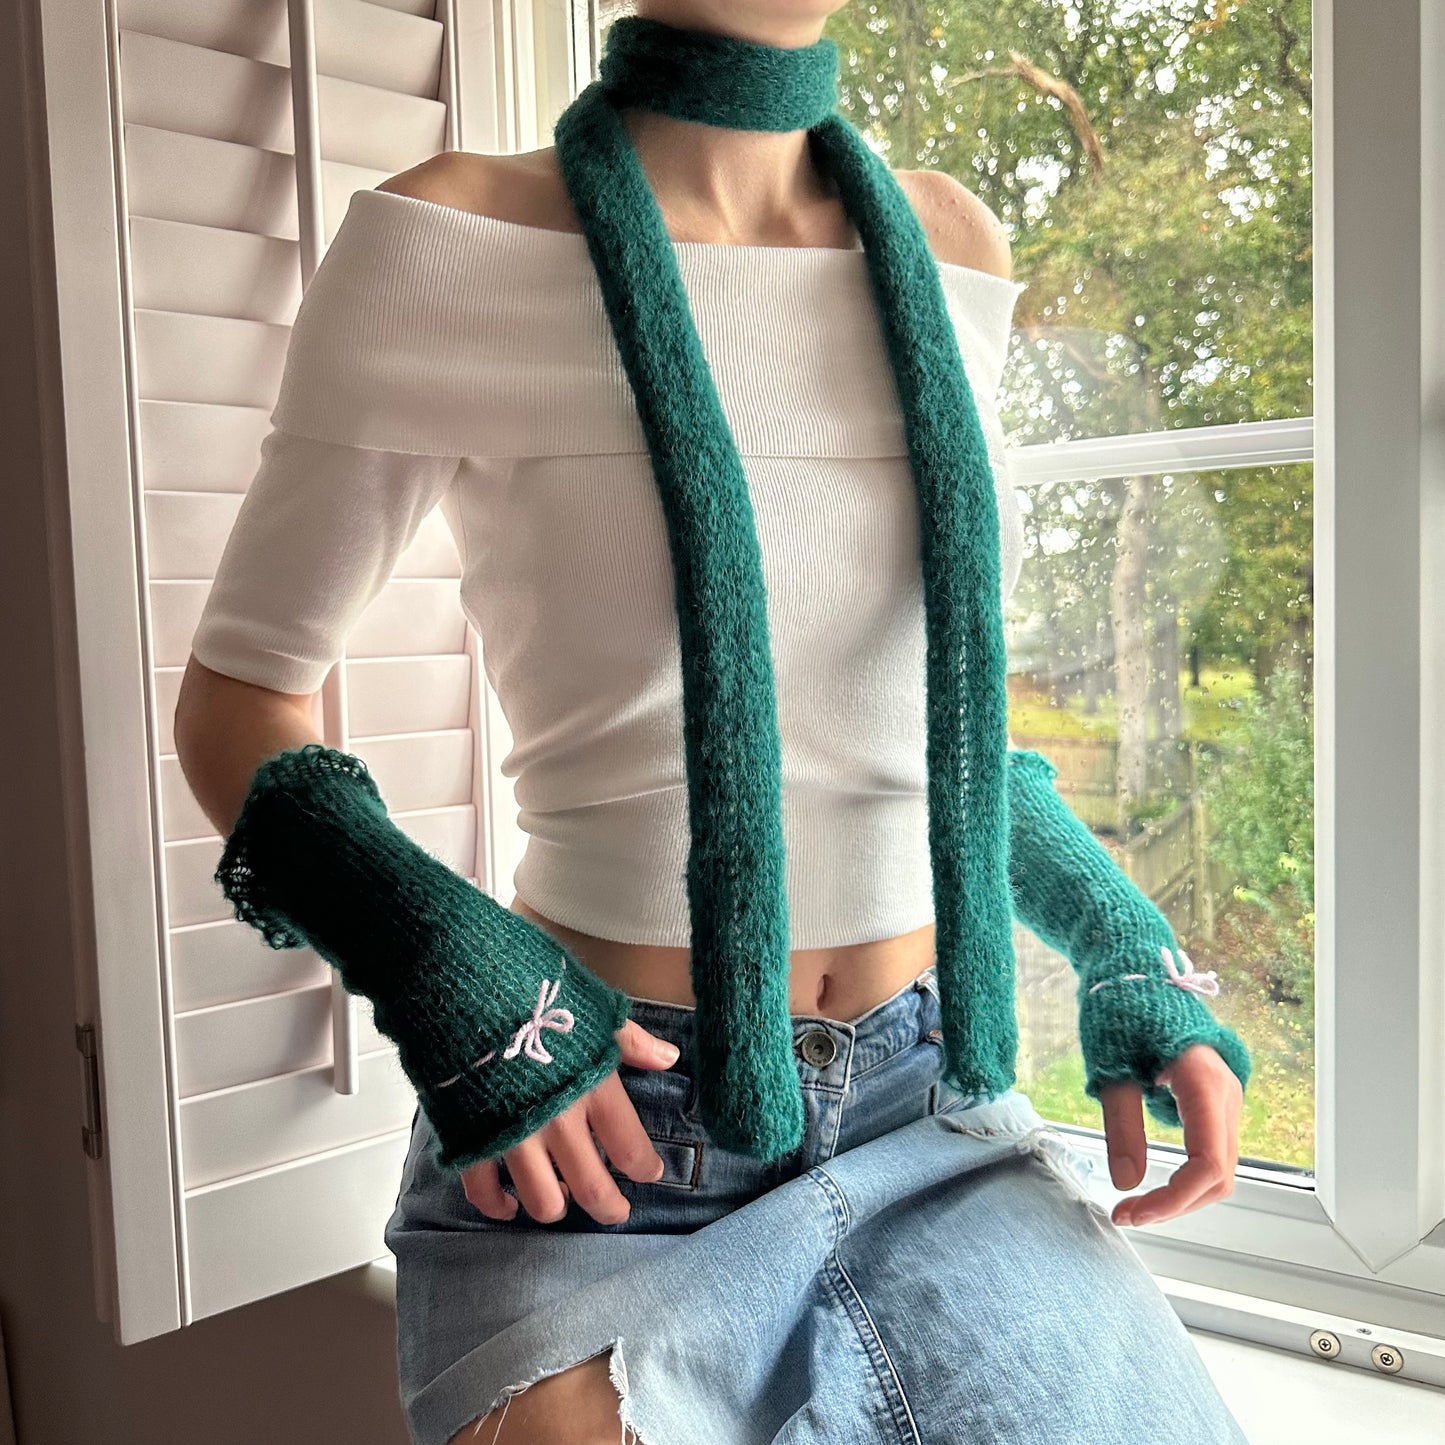 Handmade knitted mohair hand warmers in emerald green and baby pink - with thumb hole